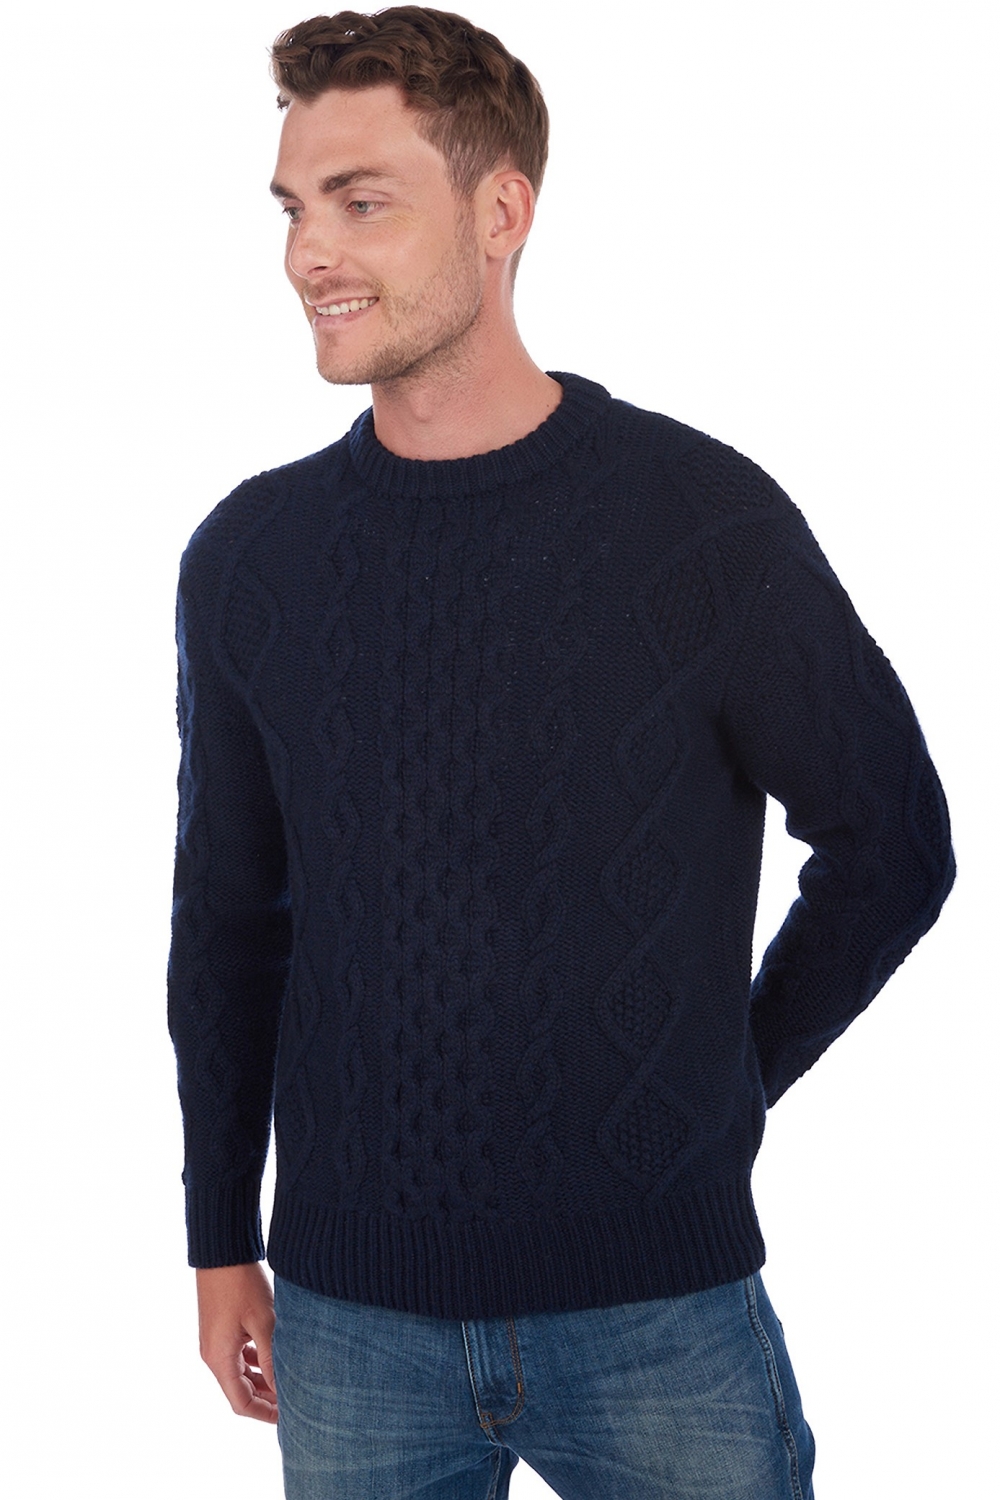 Cachemire pull homme col rond acharnes marine fonce 2xl